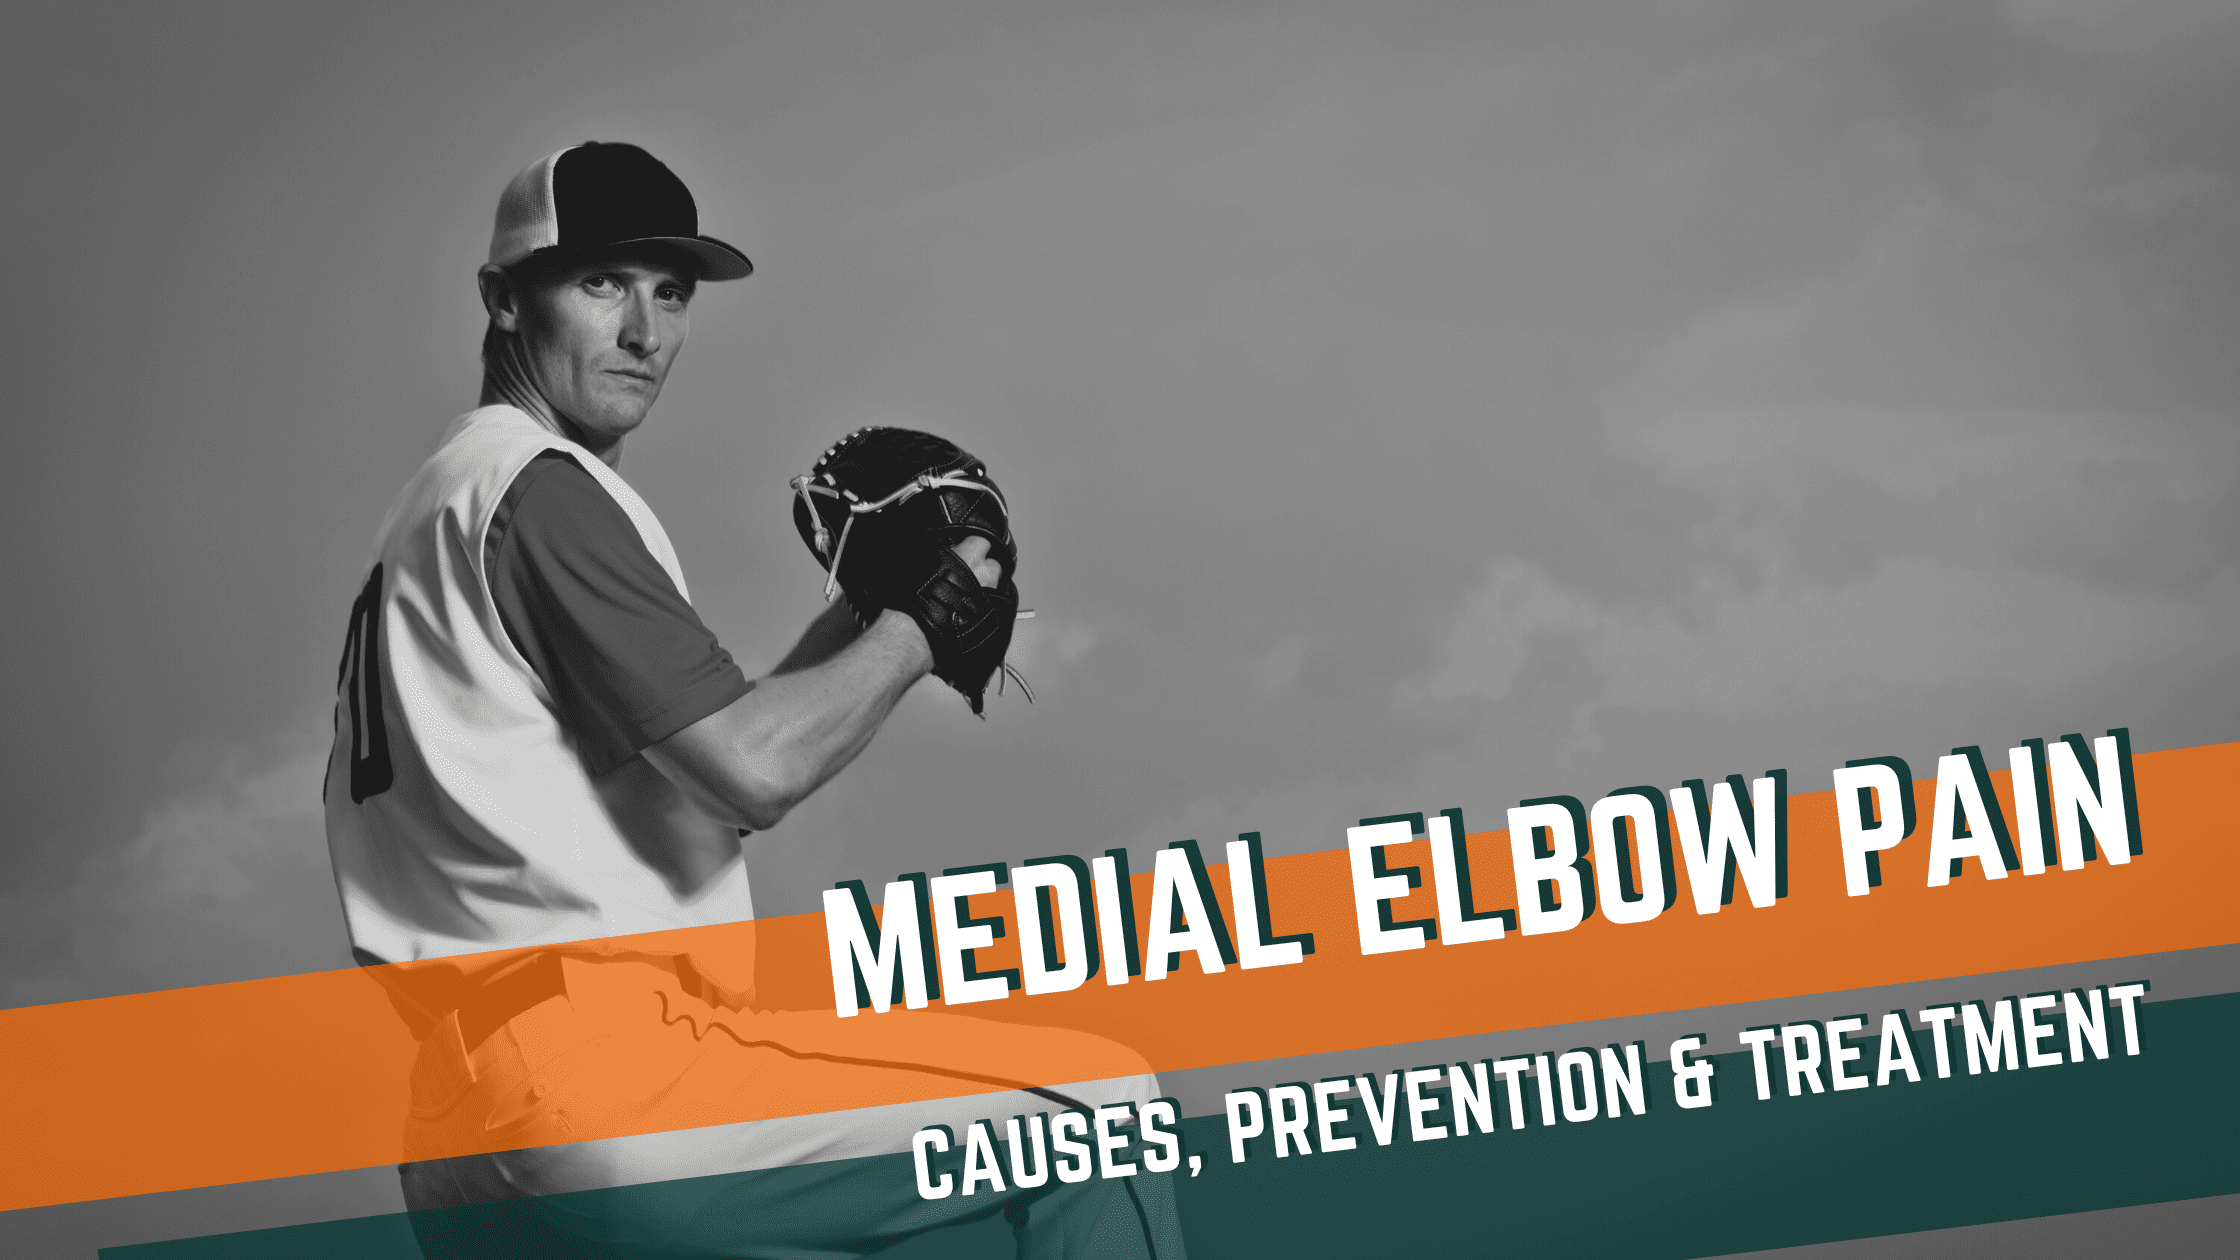 Featured image for “Medial Elbow Pain in Baseball & Softball Players”